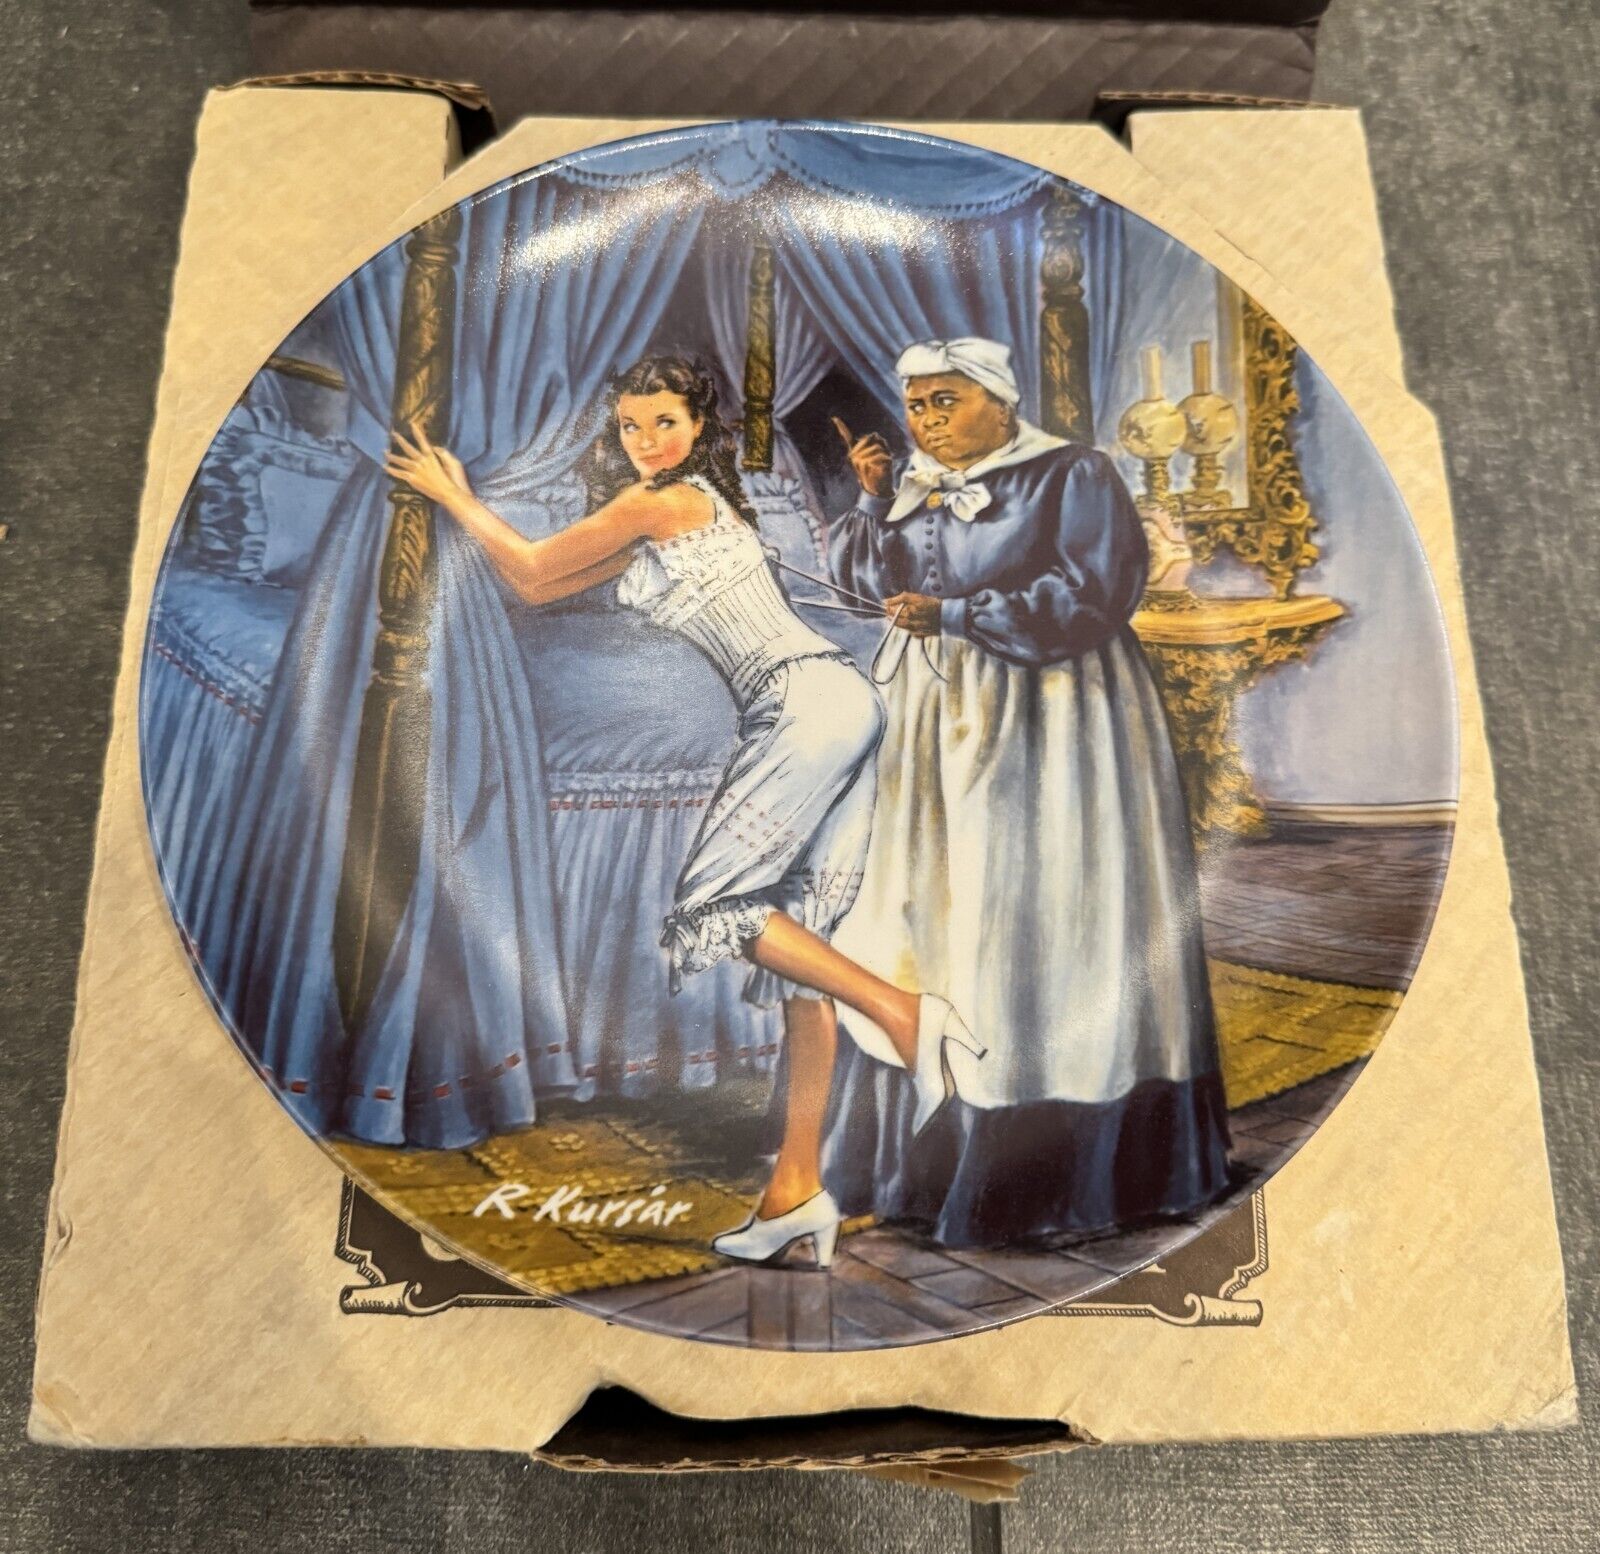 KNOWLES COLLECTOR PLATE BY R.KURSAR - GONE WITH THE WIND - LACING SCARLETT